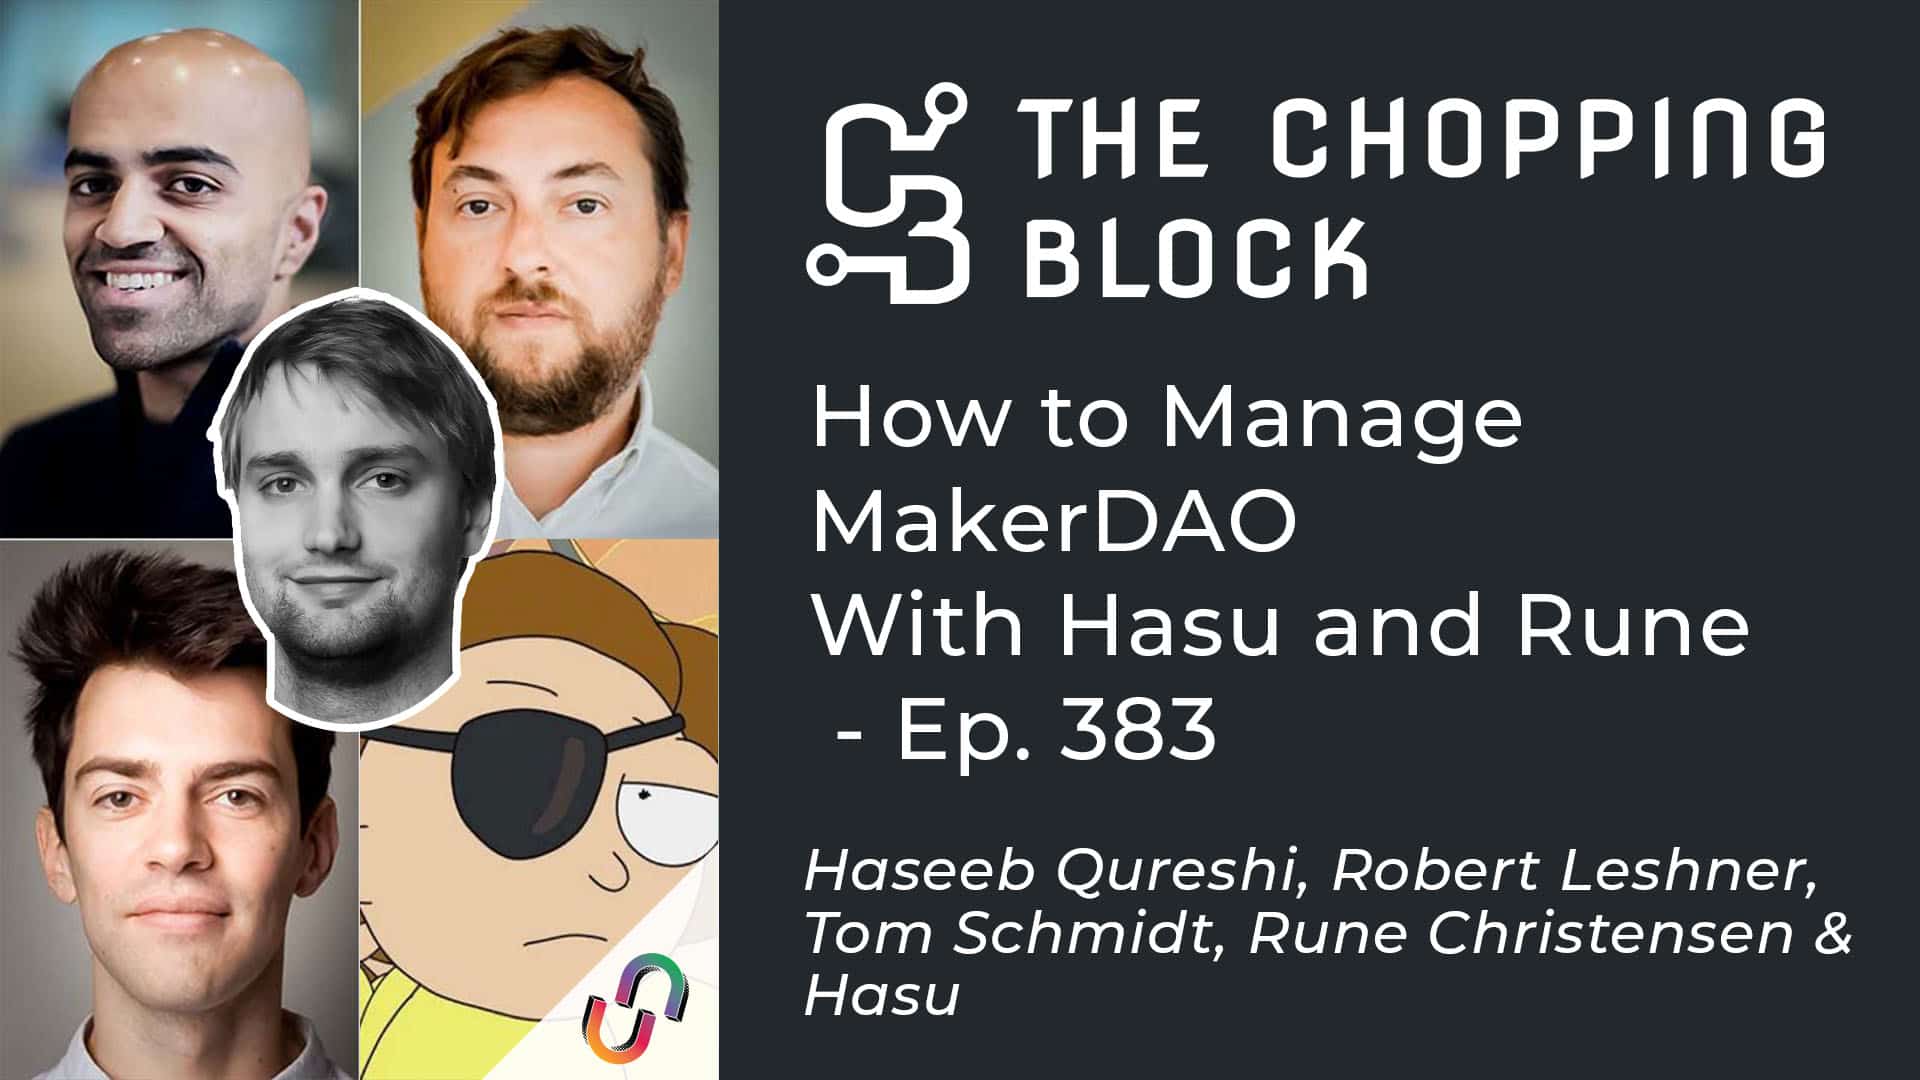 The Chopping Block: How to Manage MakerDAO, With Hasu and Rune – Ep.383